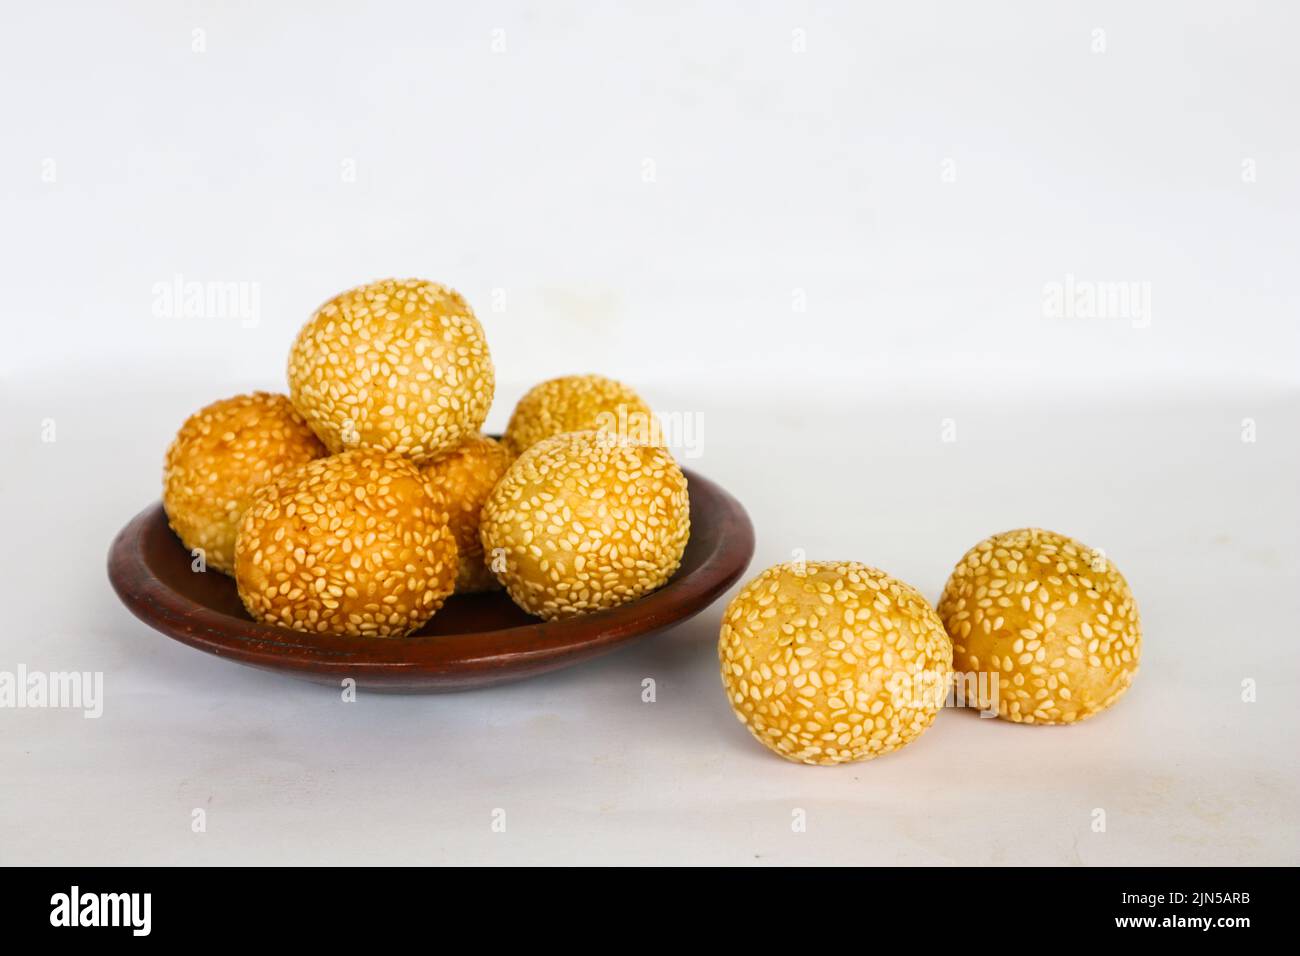 onde-onde or sesame ball or Jian Dui is fried Chinese pastry made from glutinous rice flour and coated with sesame seeds filled with bean paste. Stock Photo